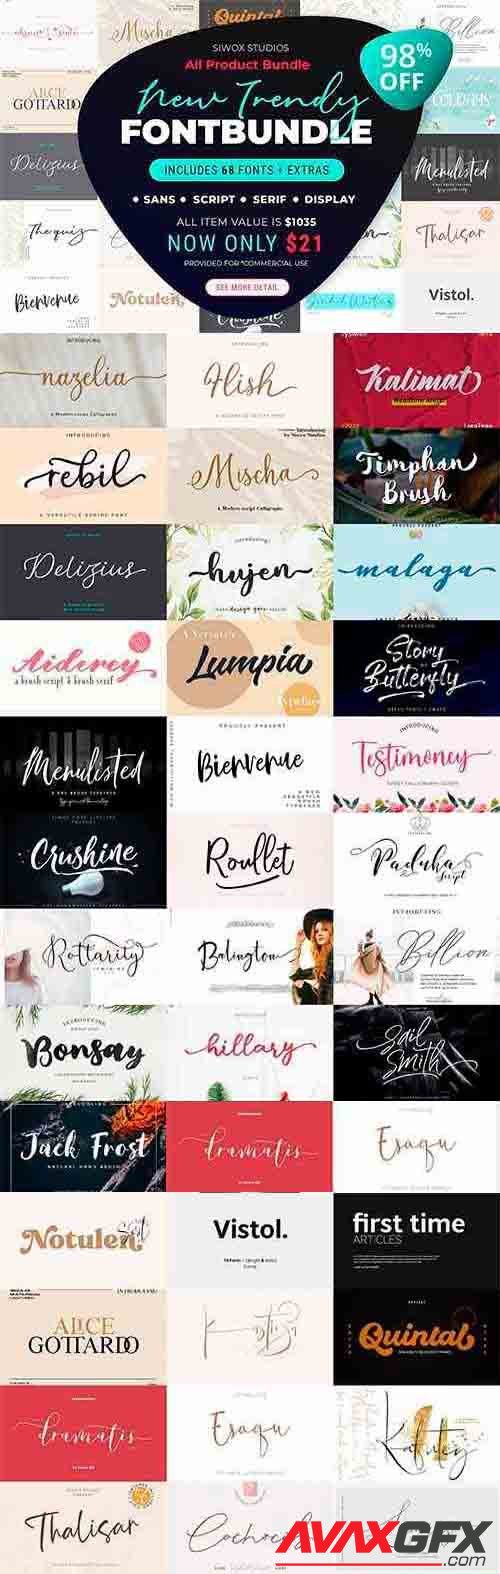 CreativeMarket - New Trendy Fonts Bundle + Extras 5956597 (Full Collection)